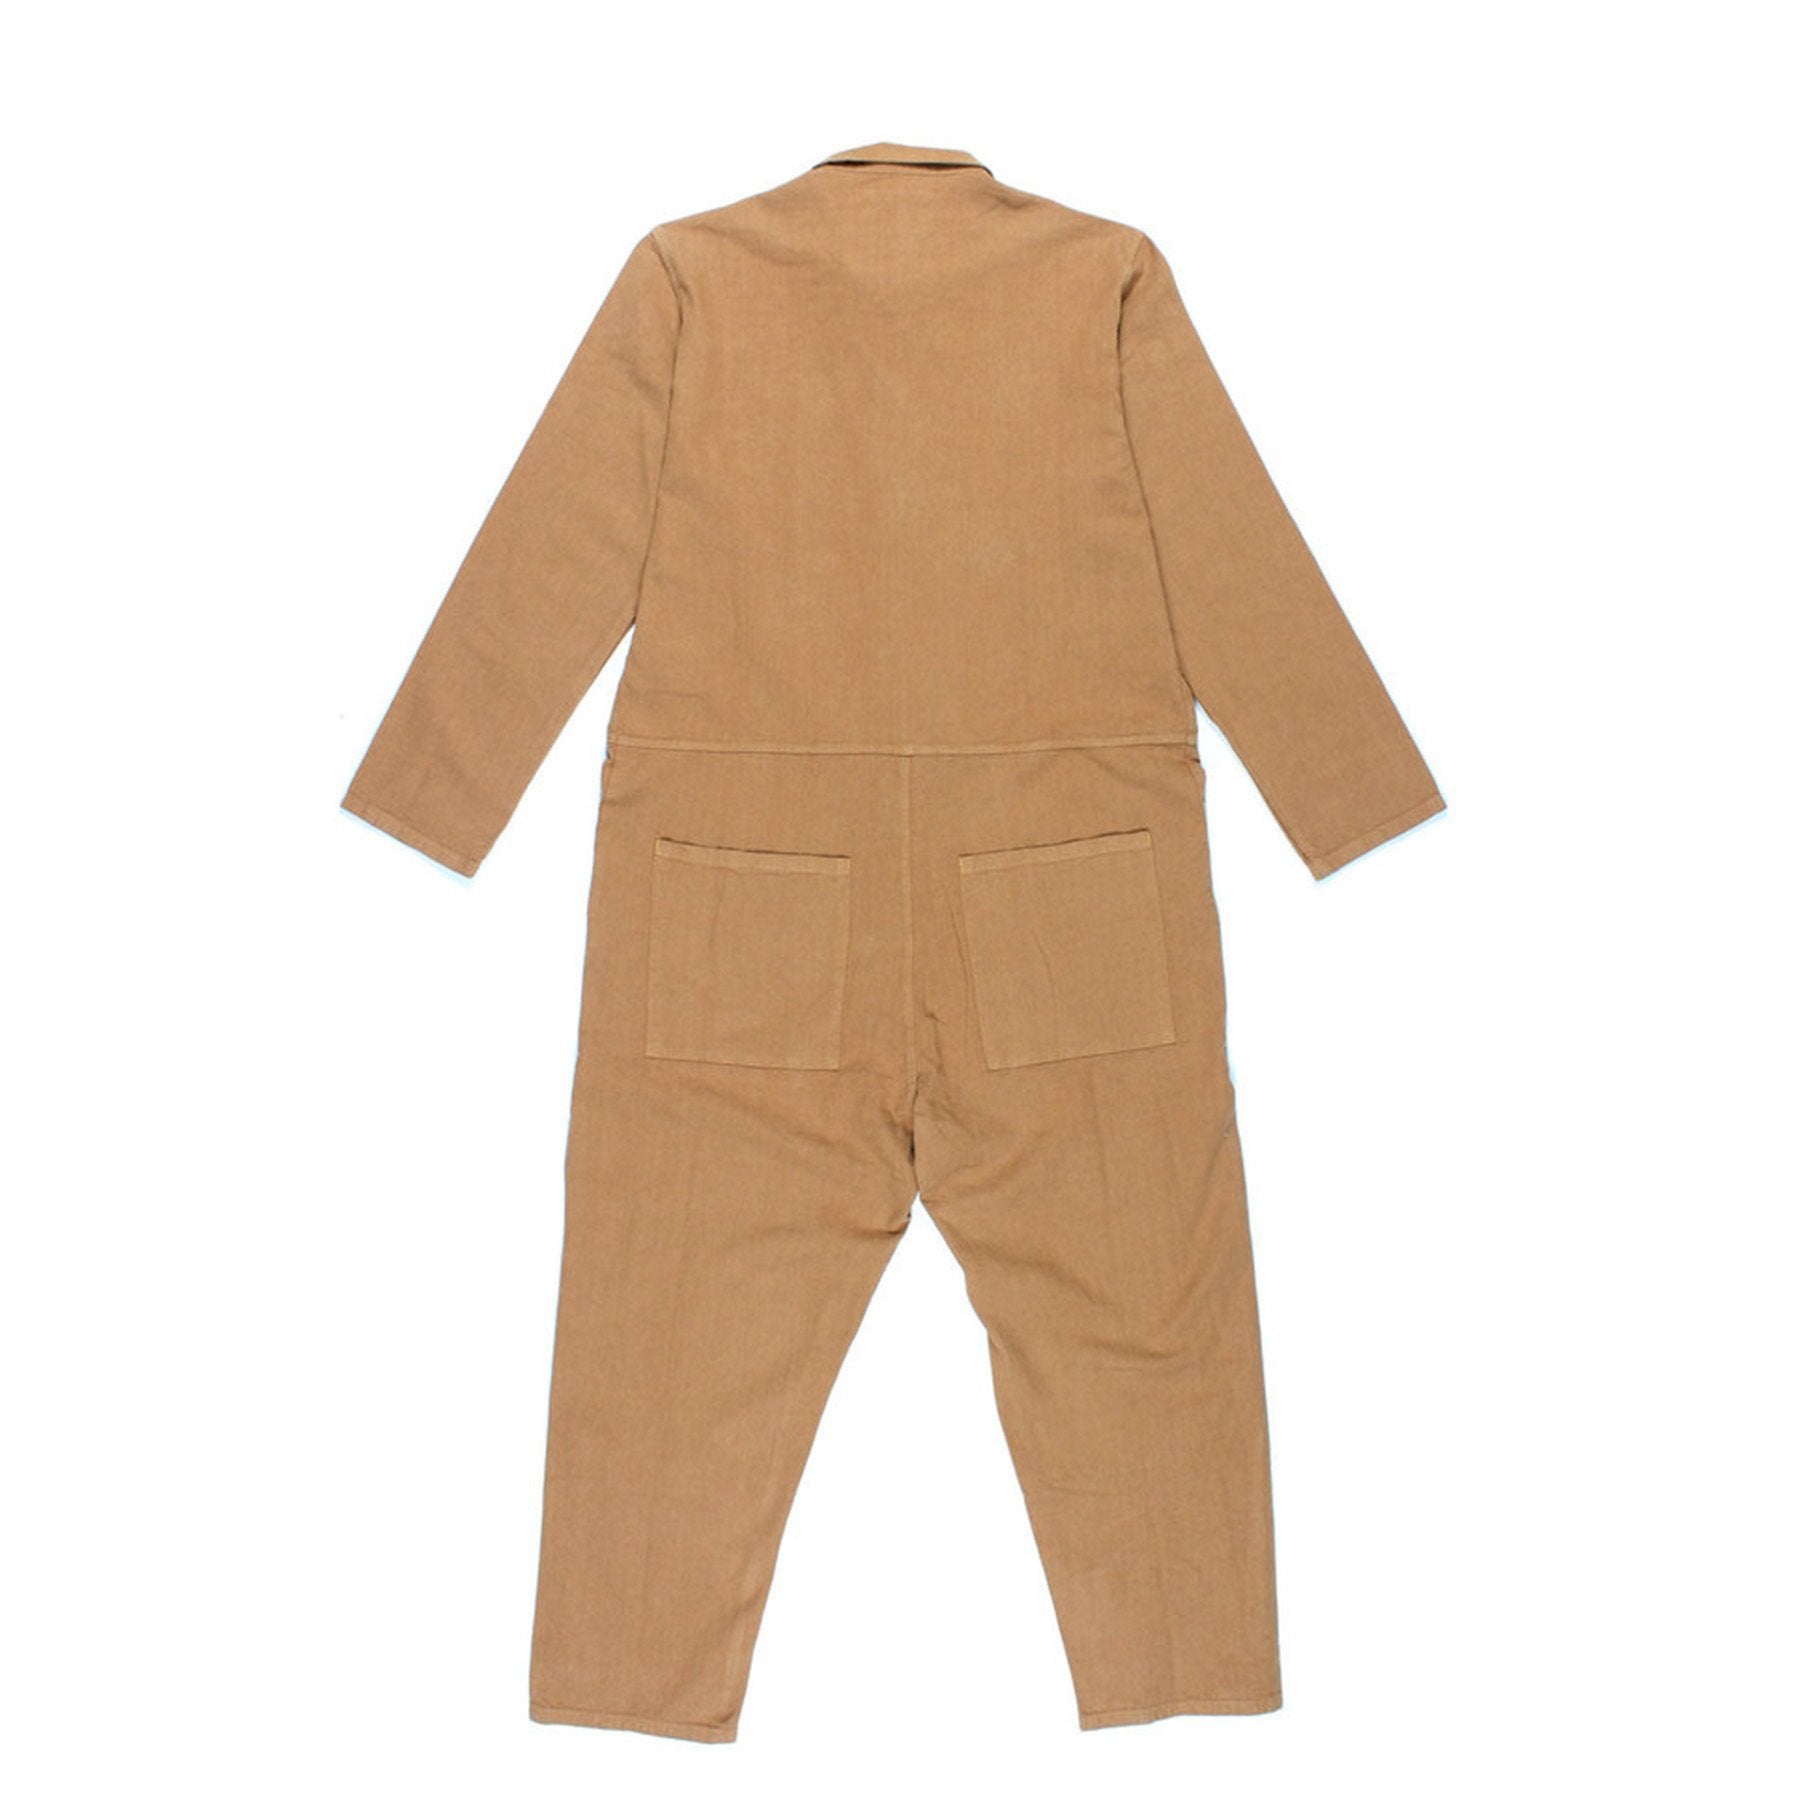 Jumpsuit T-823 Coverall by Prospective Flow - tortoise general store